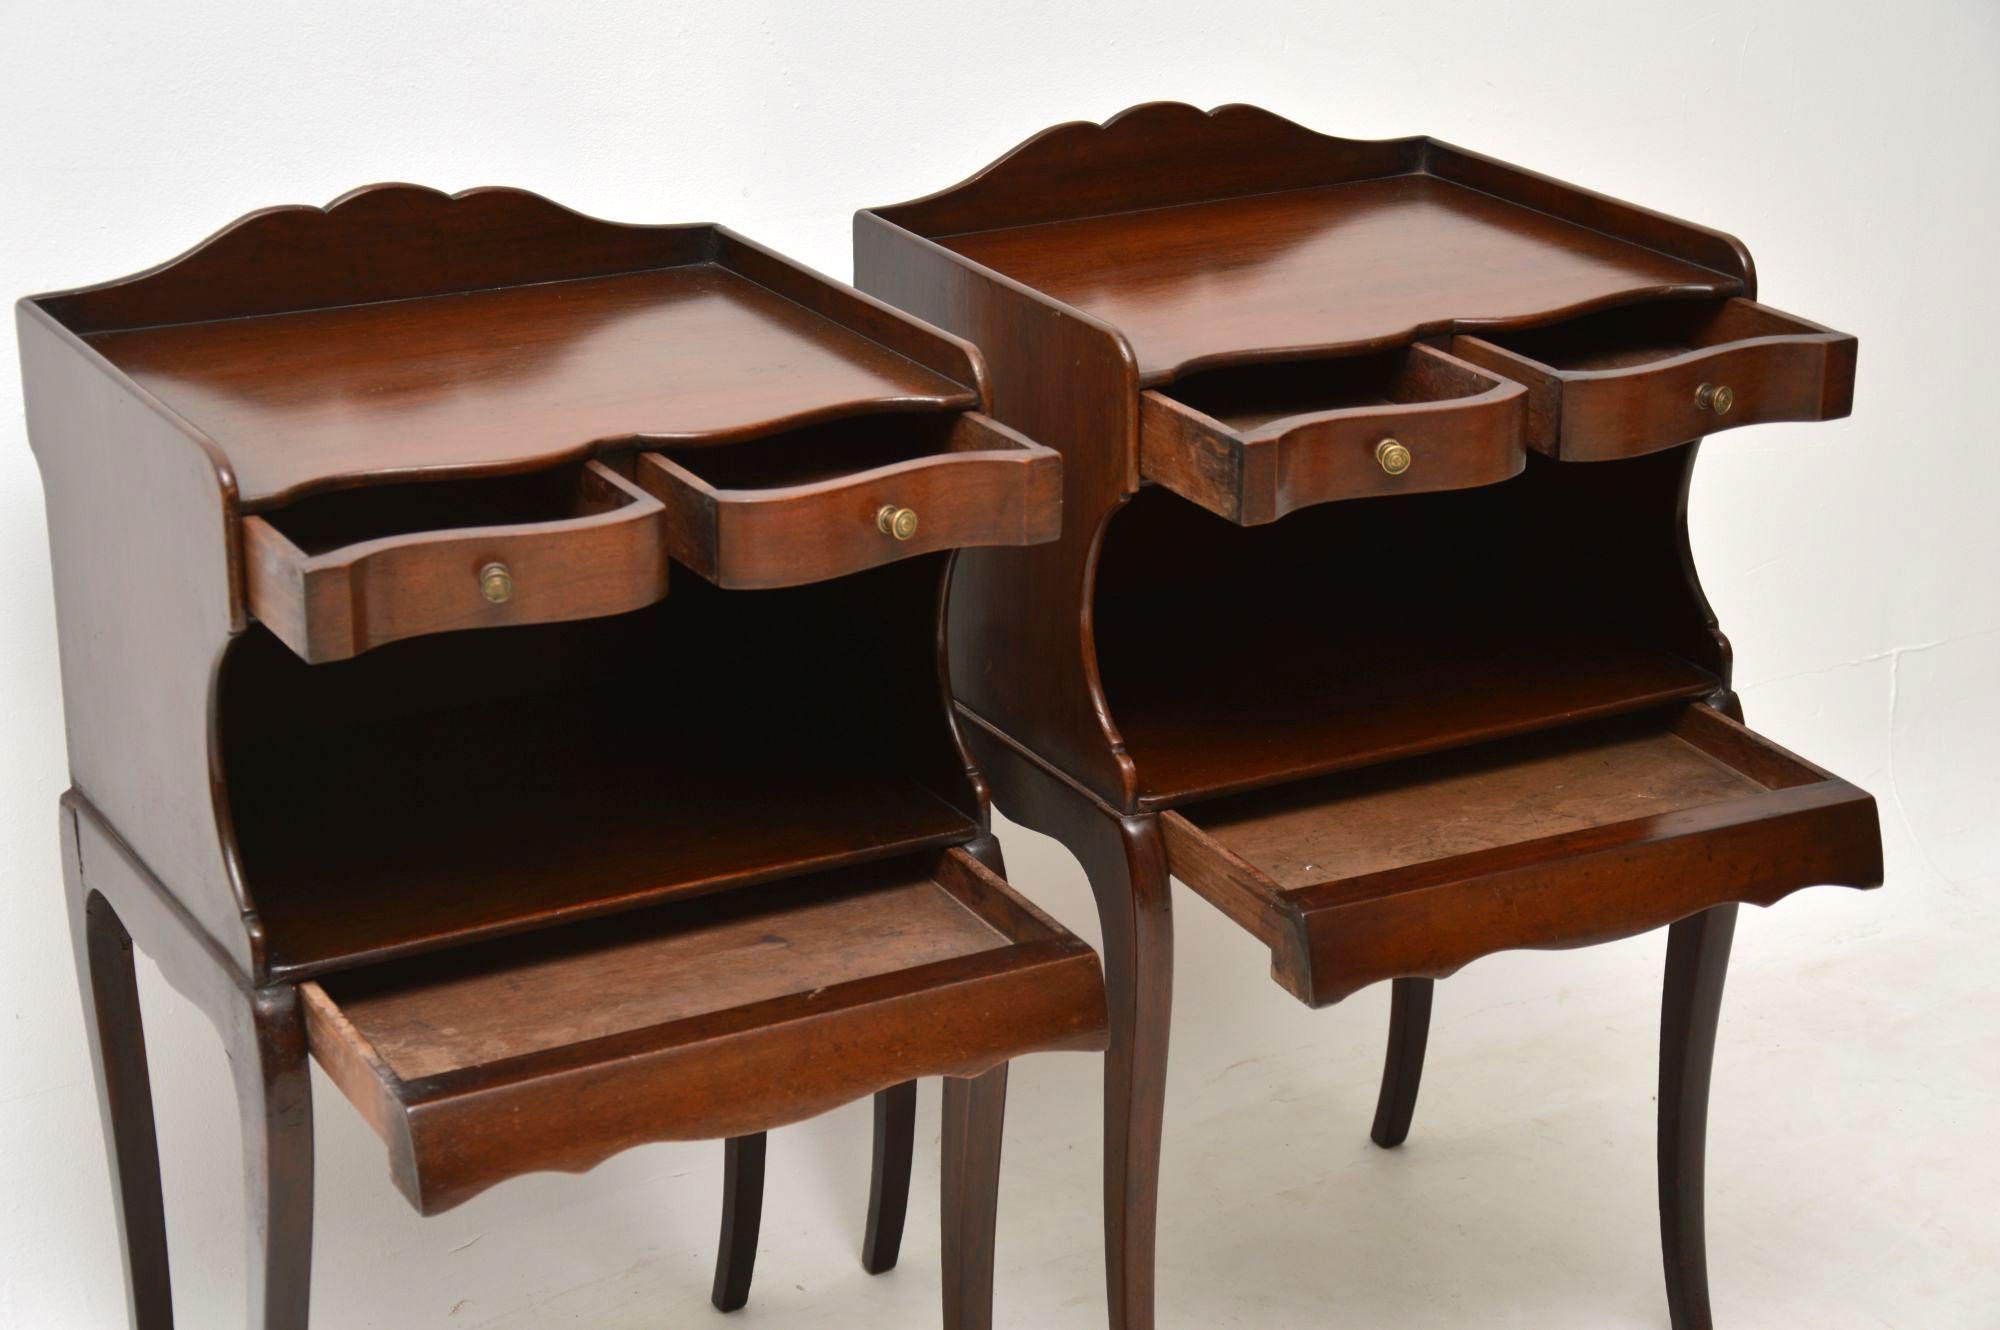 Early 20th Century Pair of Antique Mahogany Bedside Cabinets / Side Tables